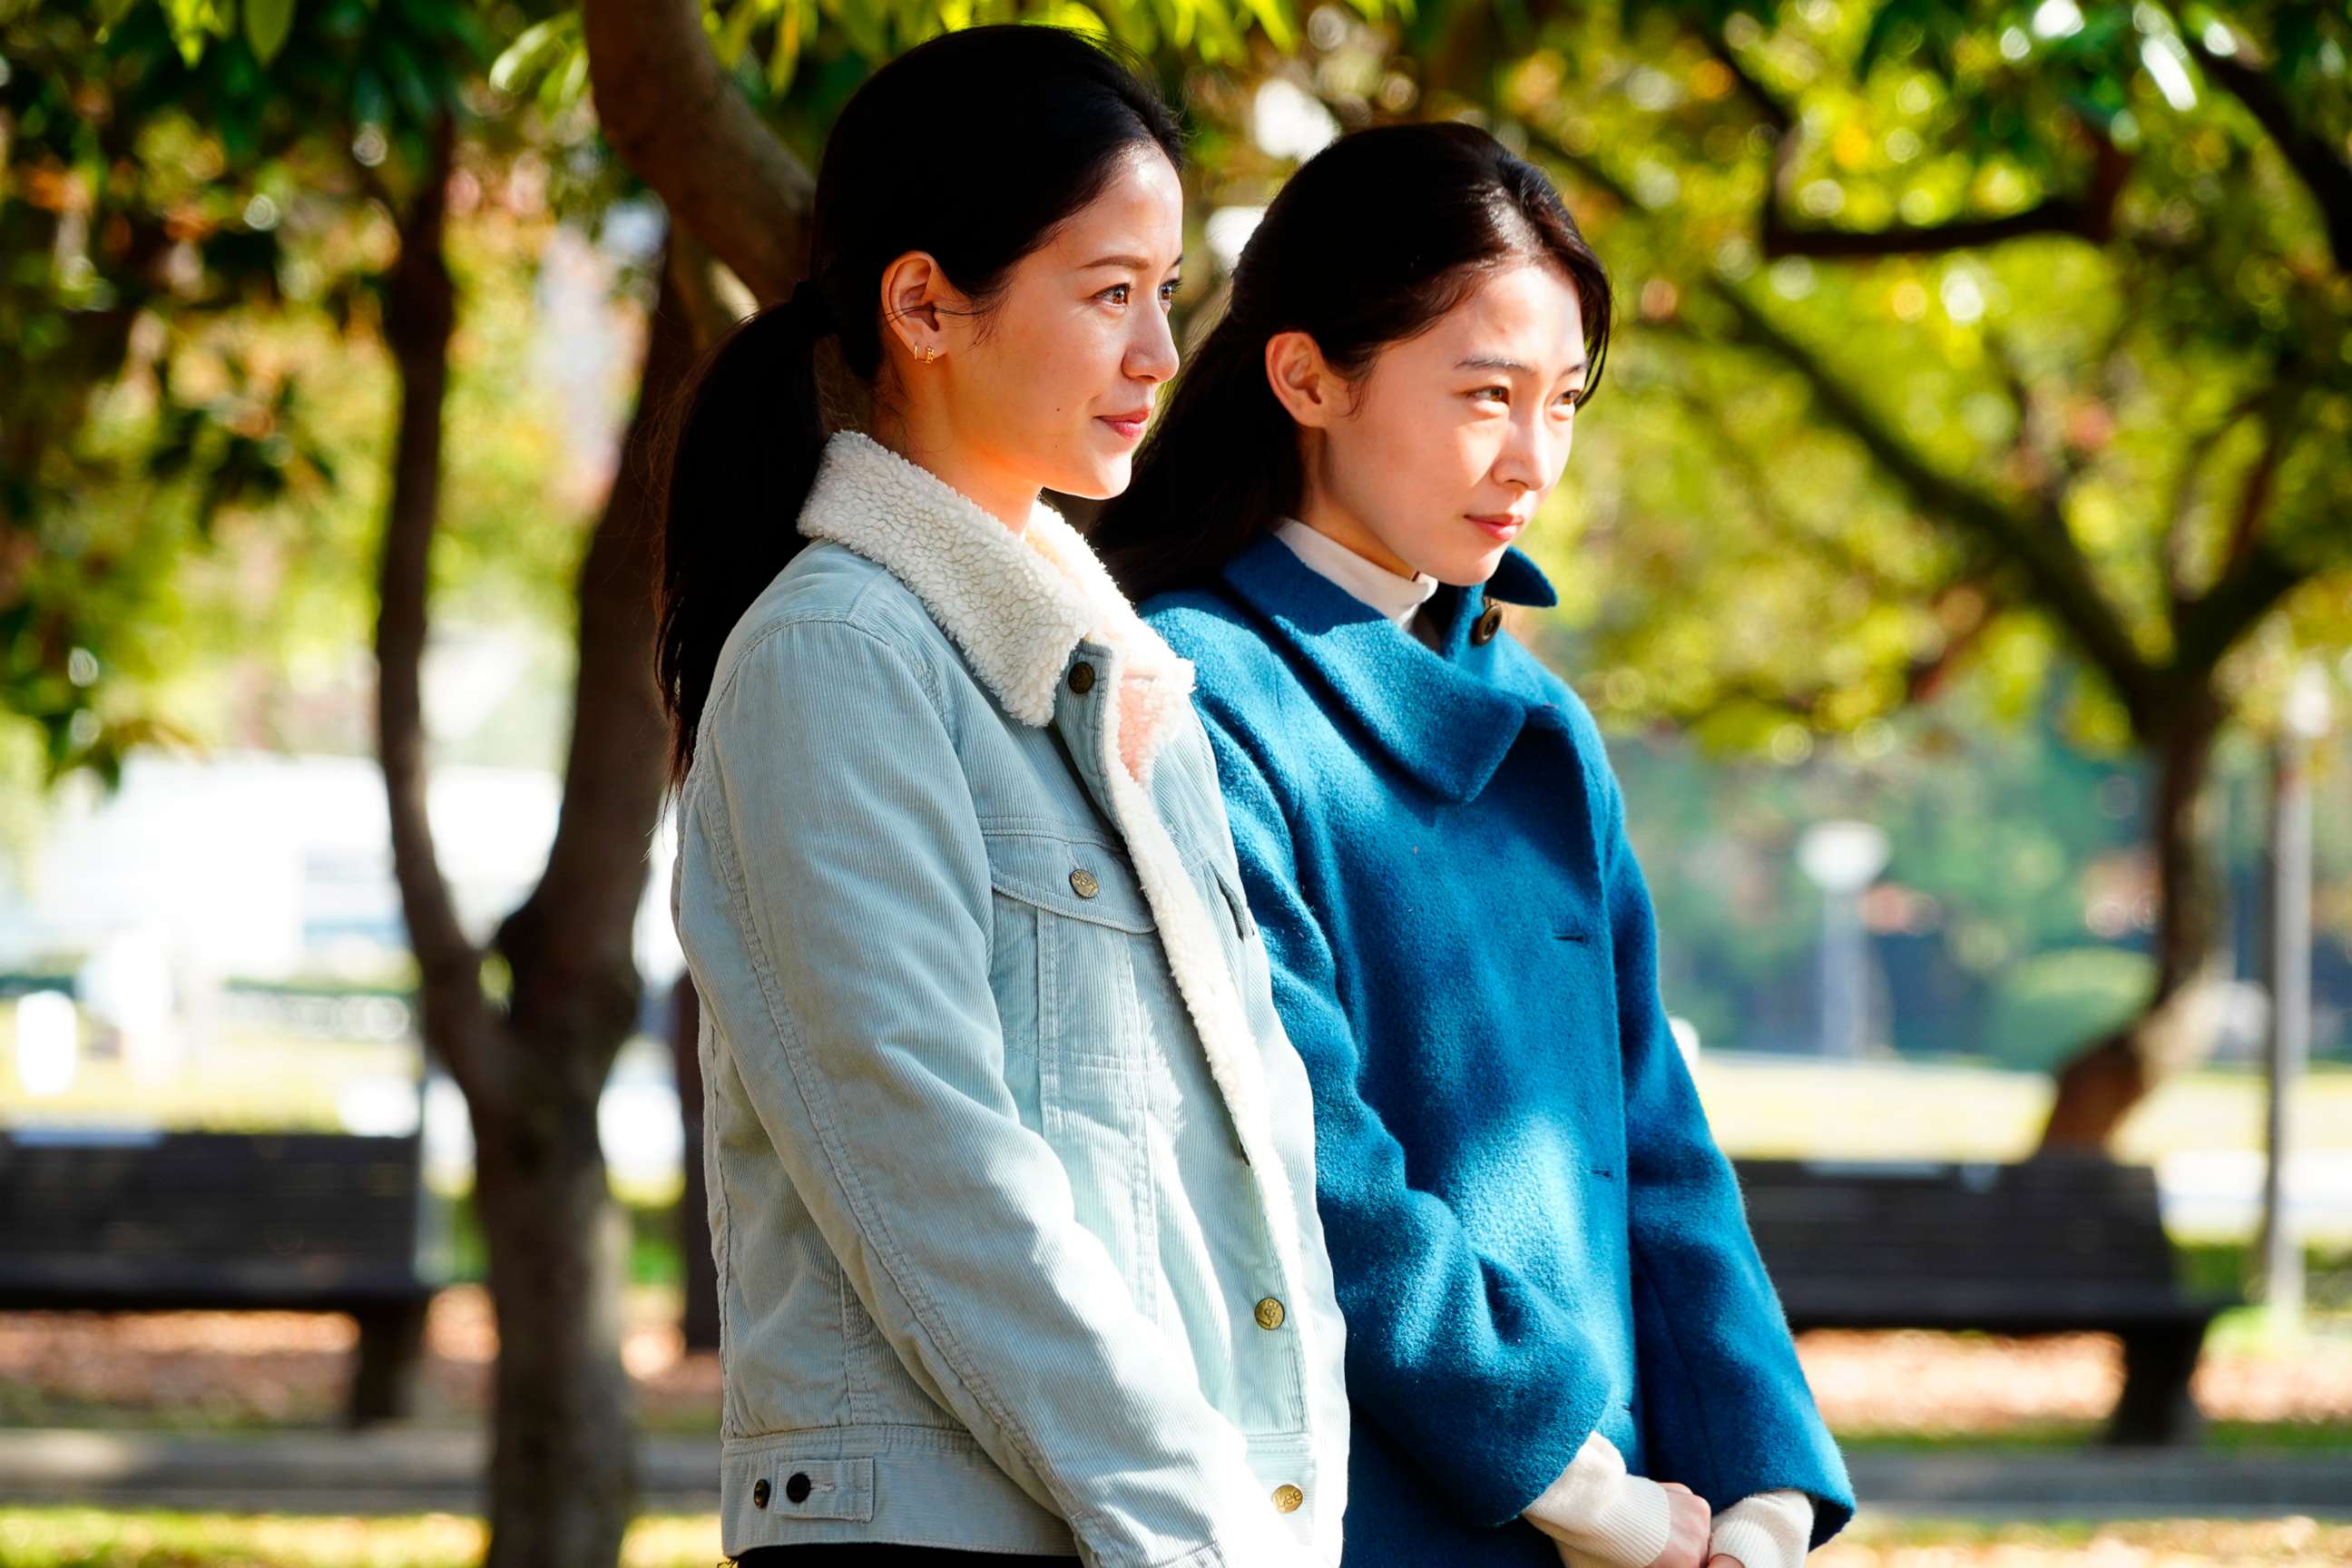 PHOTO: Sonia Yuan and Park Yurim in a scene from "Drive my Car."